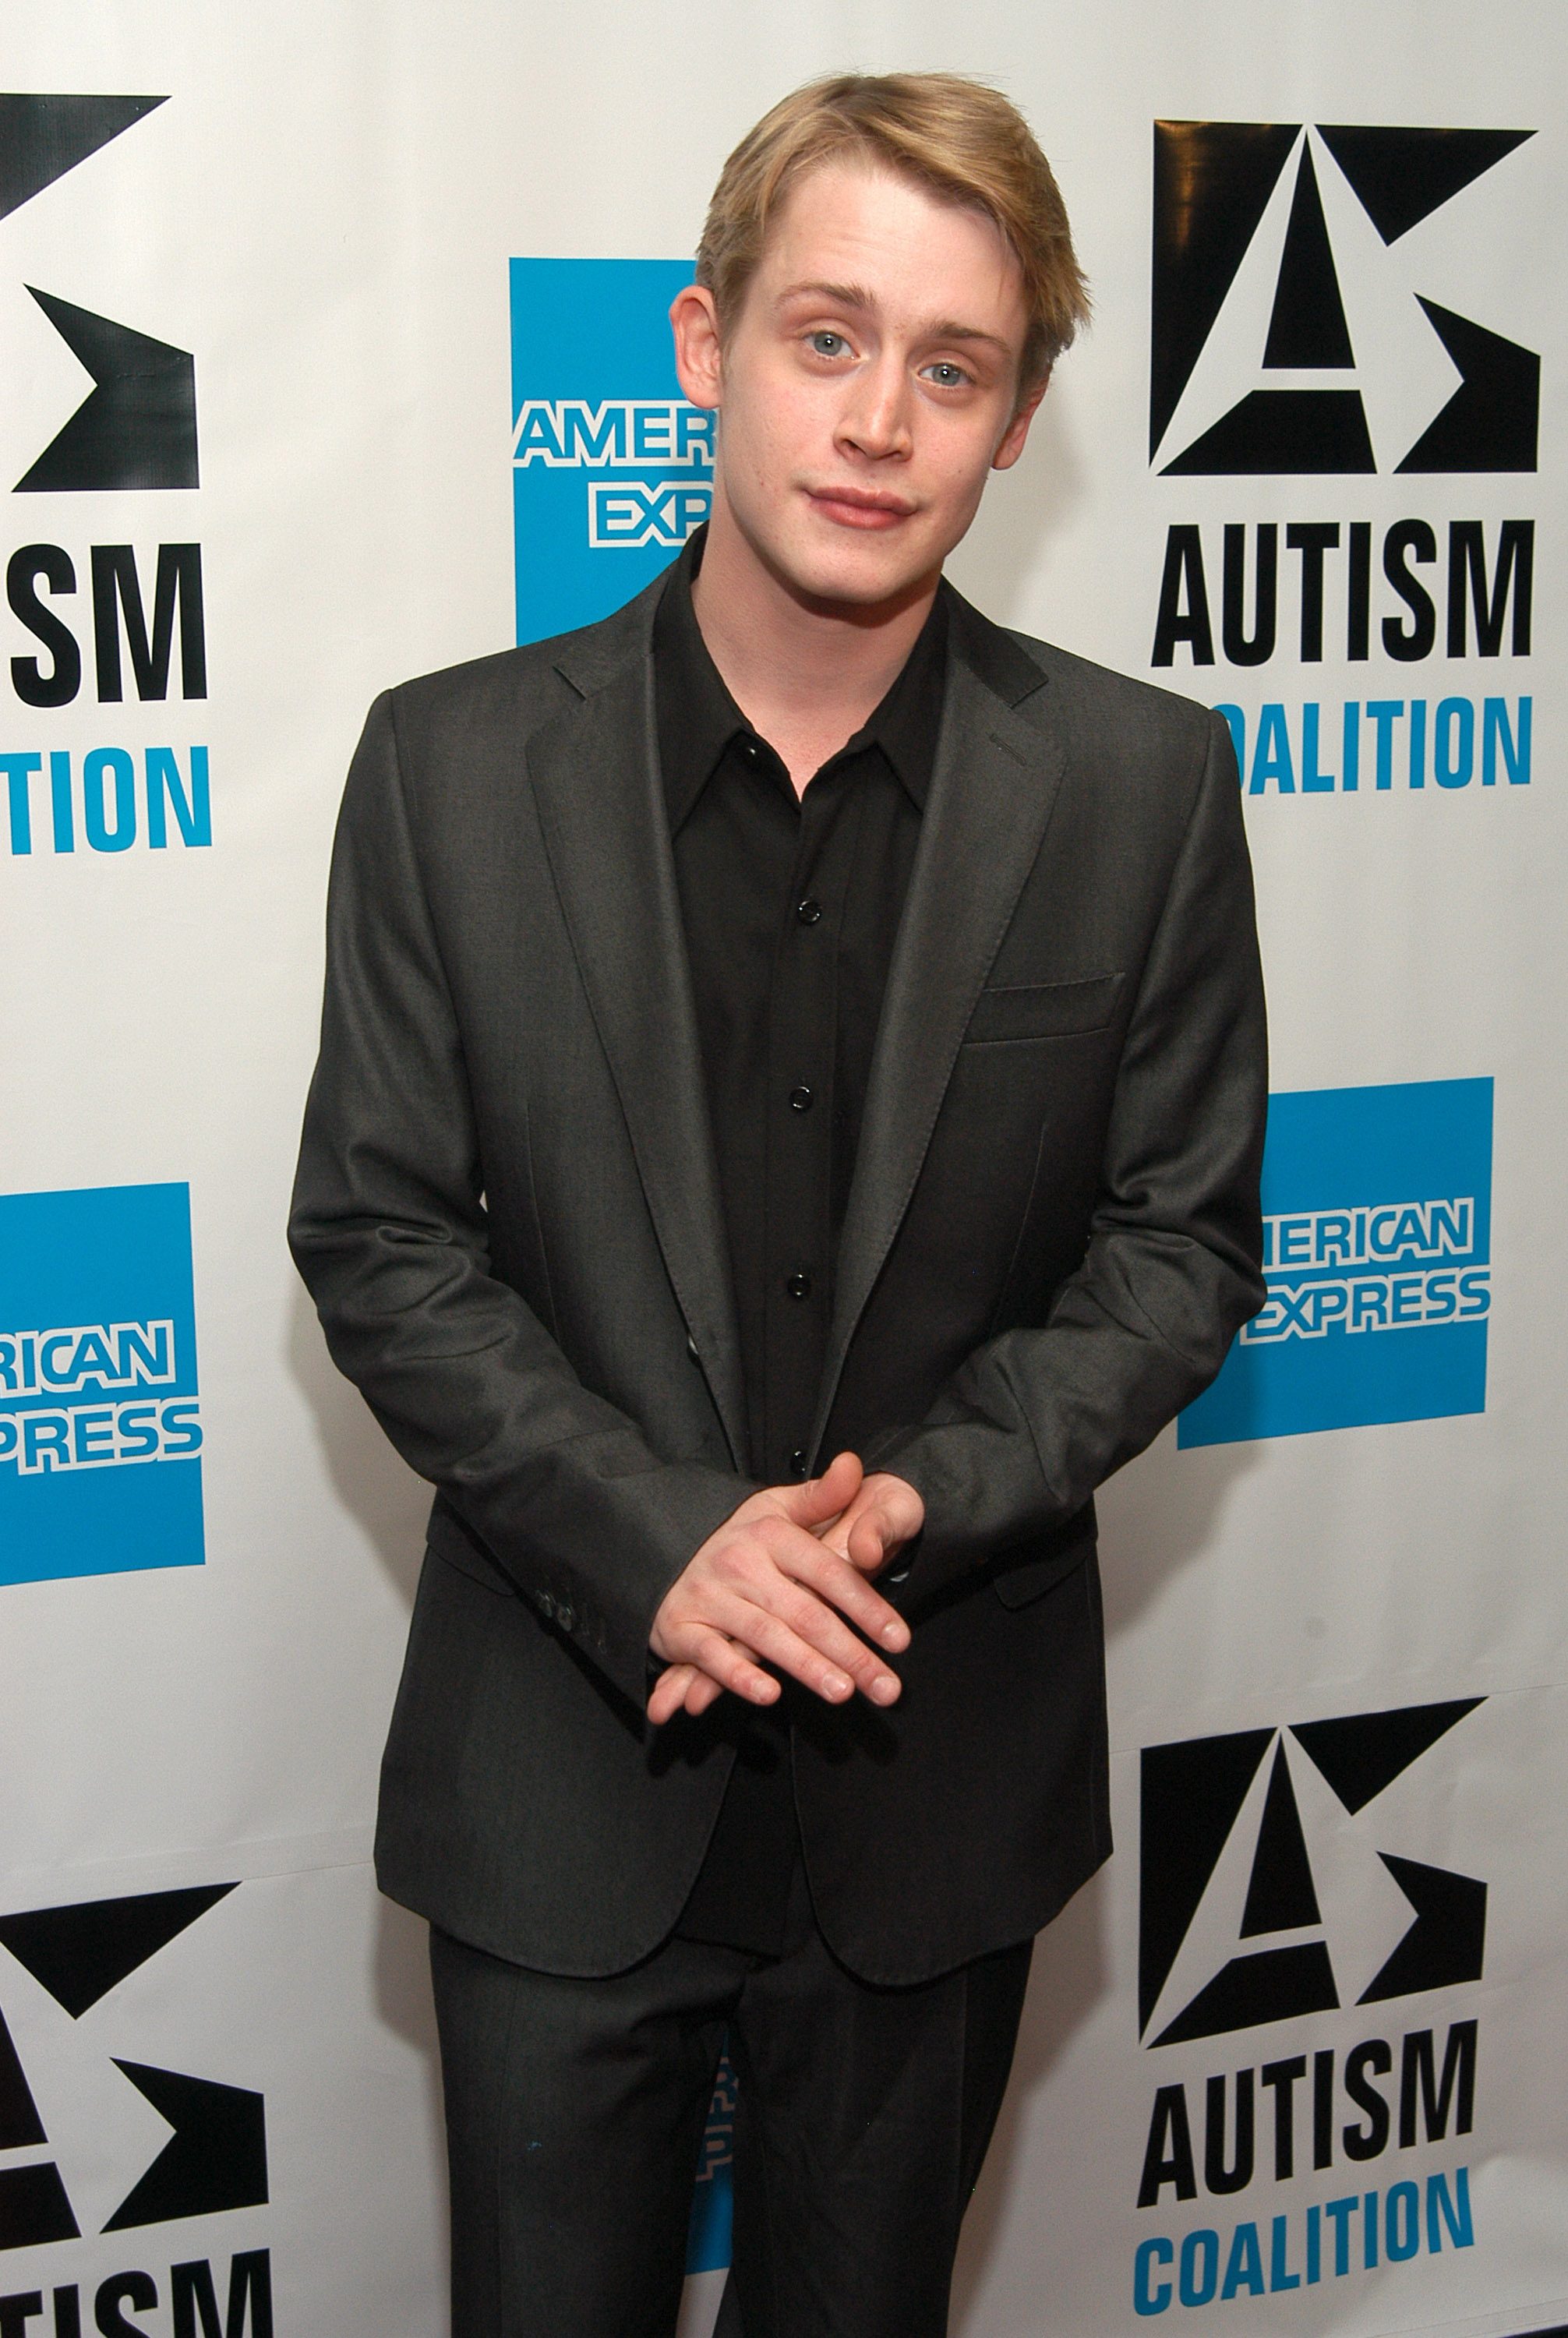 Macaulay Culkin at the "Night of Too Many Stars" benefit in New York City in 2003 | Source: Getty Images